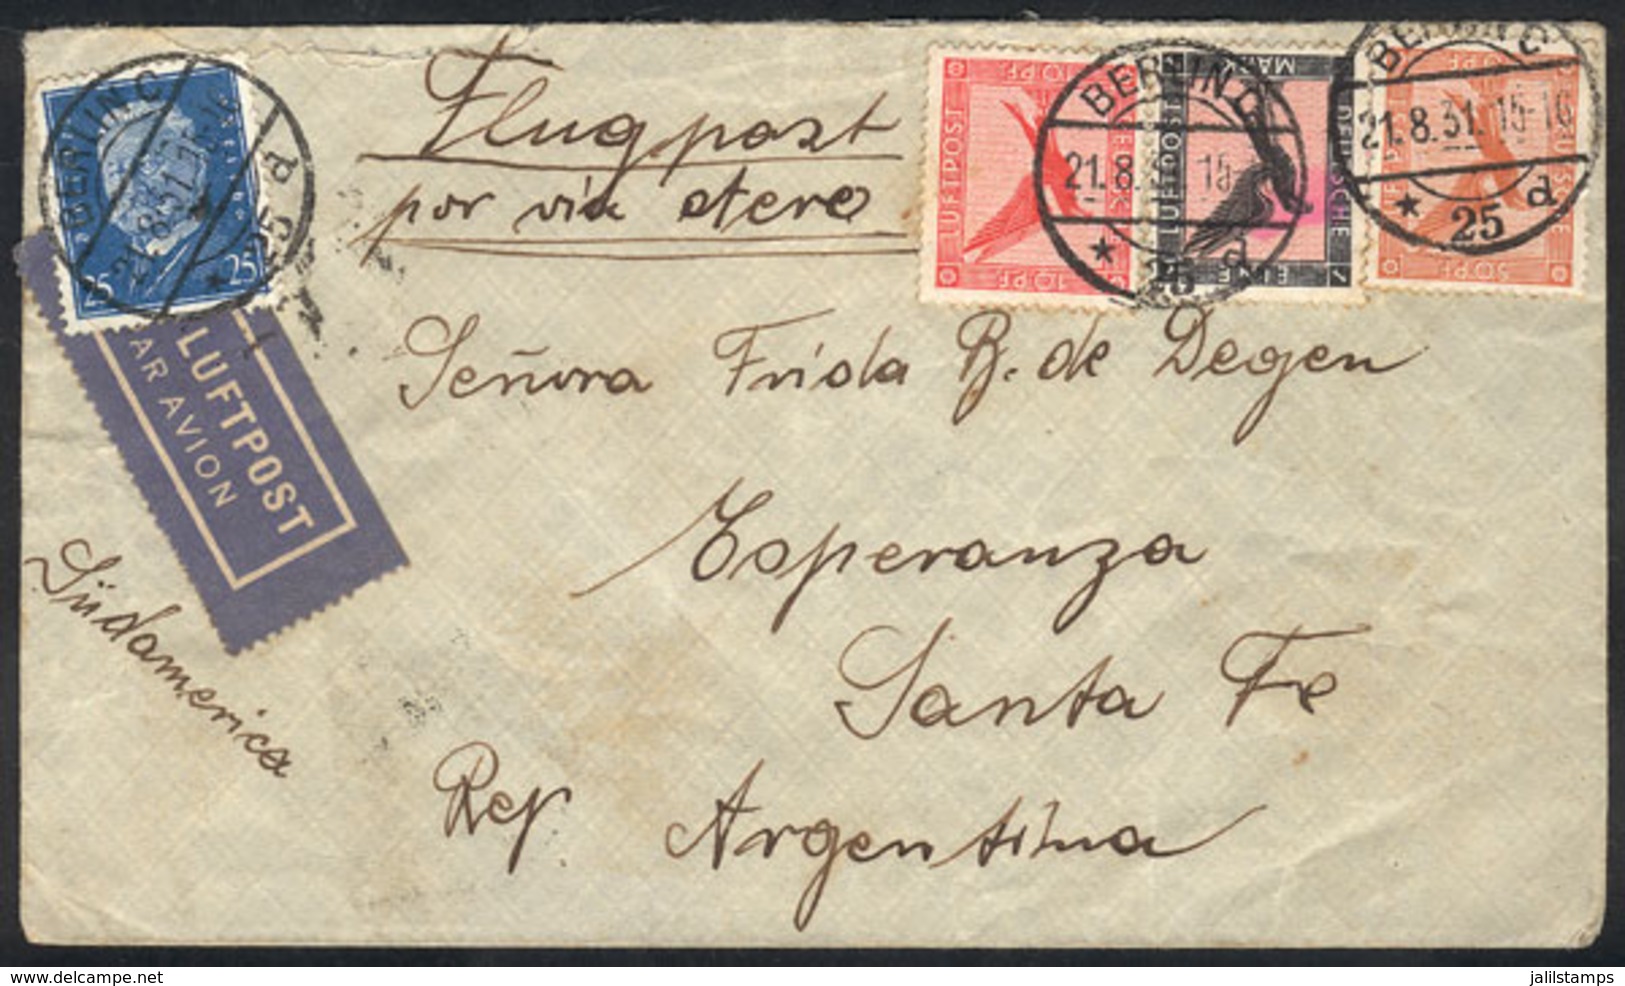 GERMANY: Airmail Cover Sent From Berlin To Argentina On 21/AU/1931 By Air France (transit Backstamp Of Strasbourg) Frank - Prephilately